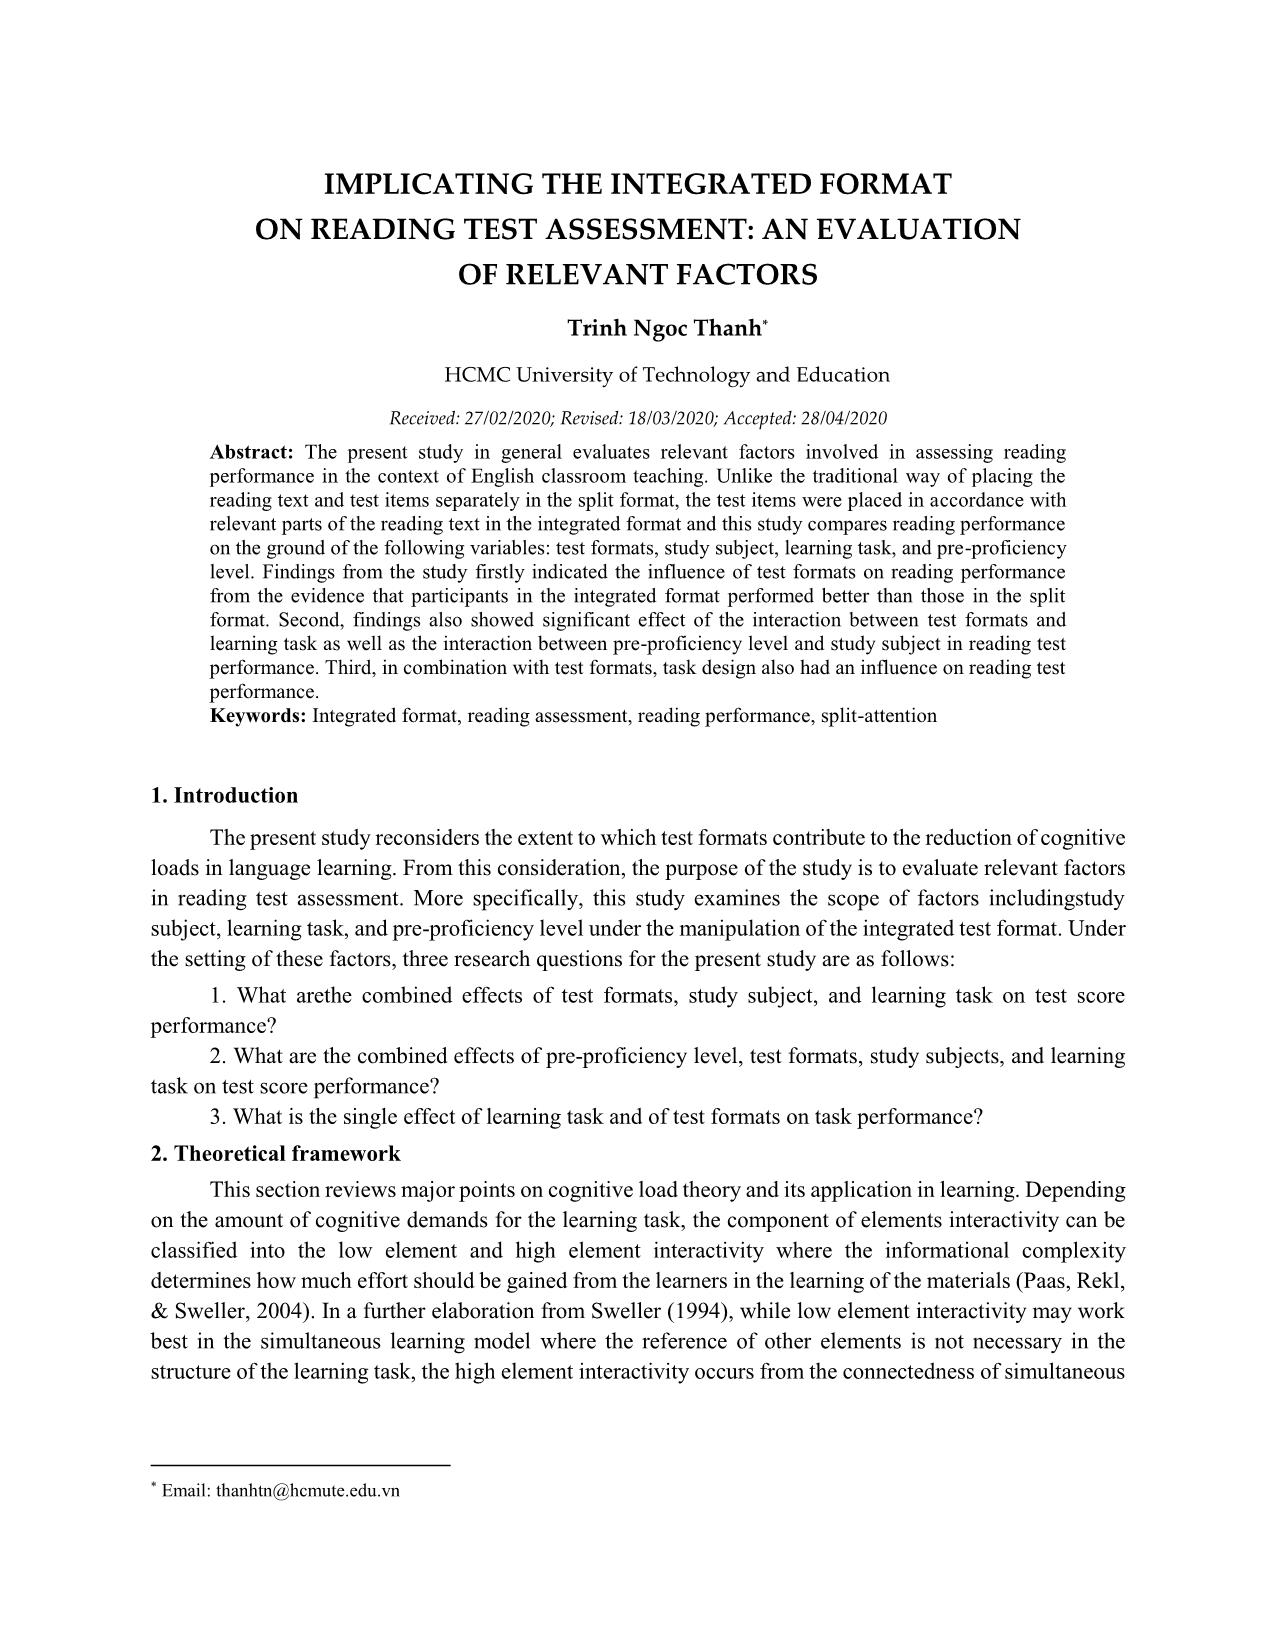 Implicating the integrated format on reading test assessment: An evaluation of relevant factors trang 1